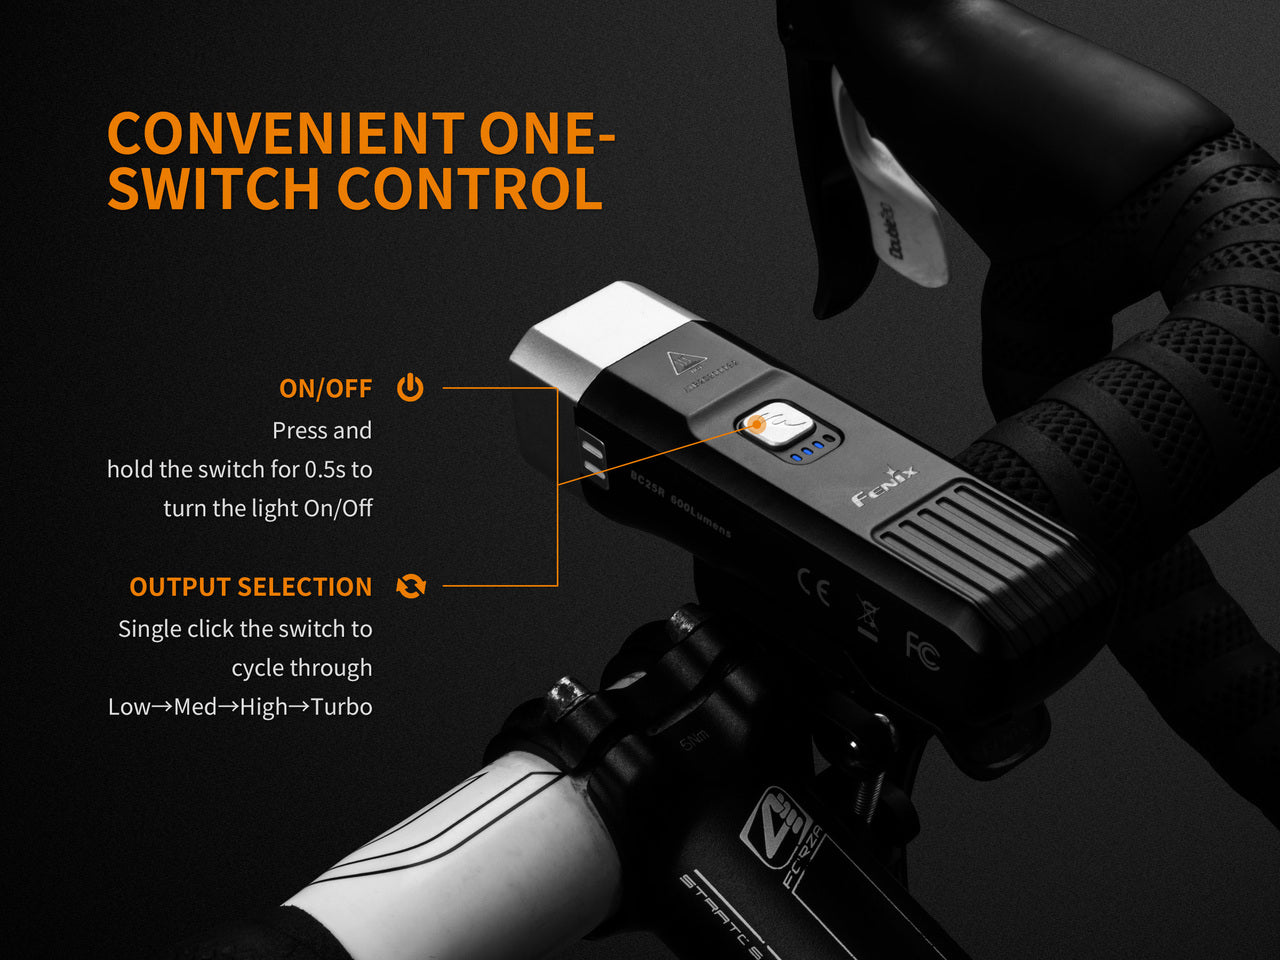 Fenix BC25R LED Bike Light, 600 Lumens USB Rechargeable Bicycle Light, Neutral White LED Light, Compact yet Powerful Light for Bike Trails and Races in India